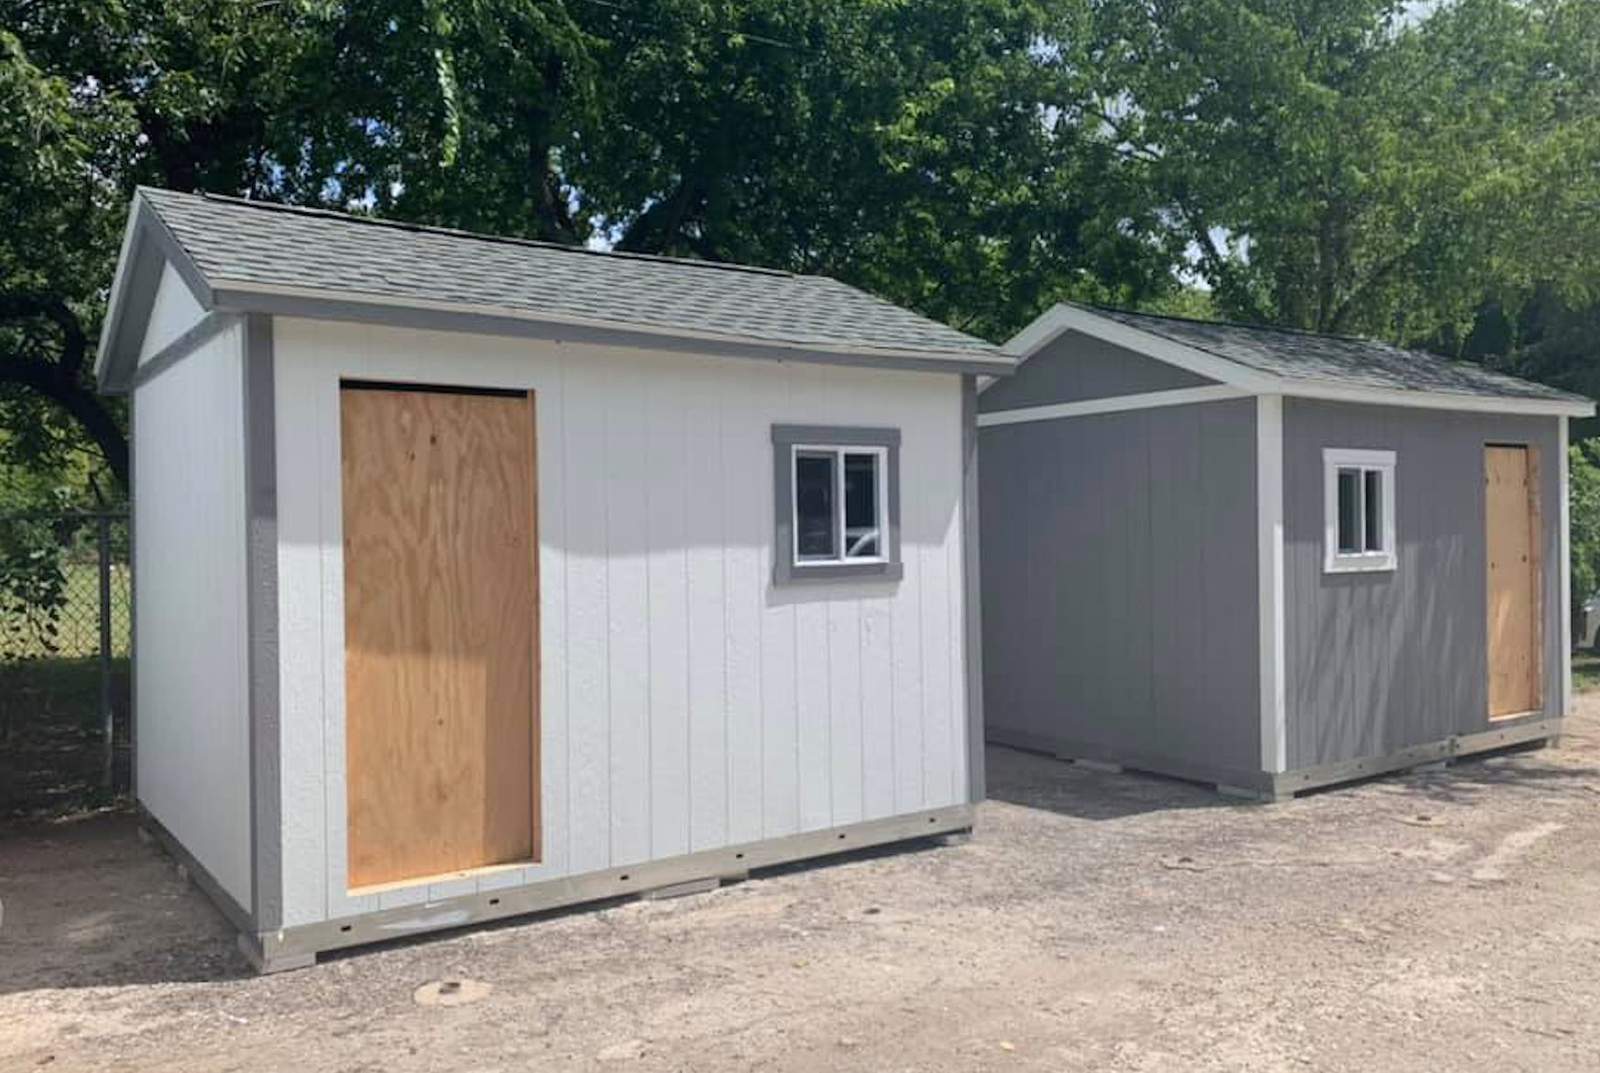 This Texas animal shelter is using tiny homes instead of kennels to house dogs in need